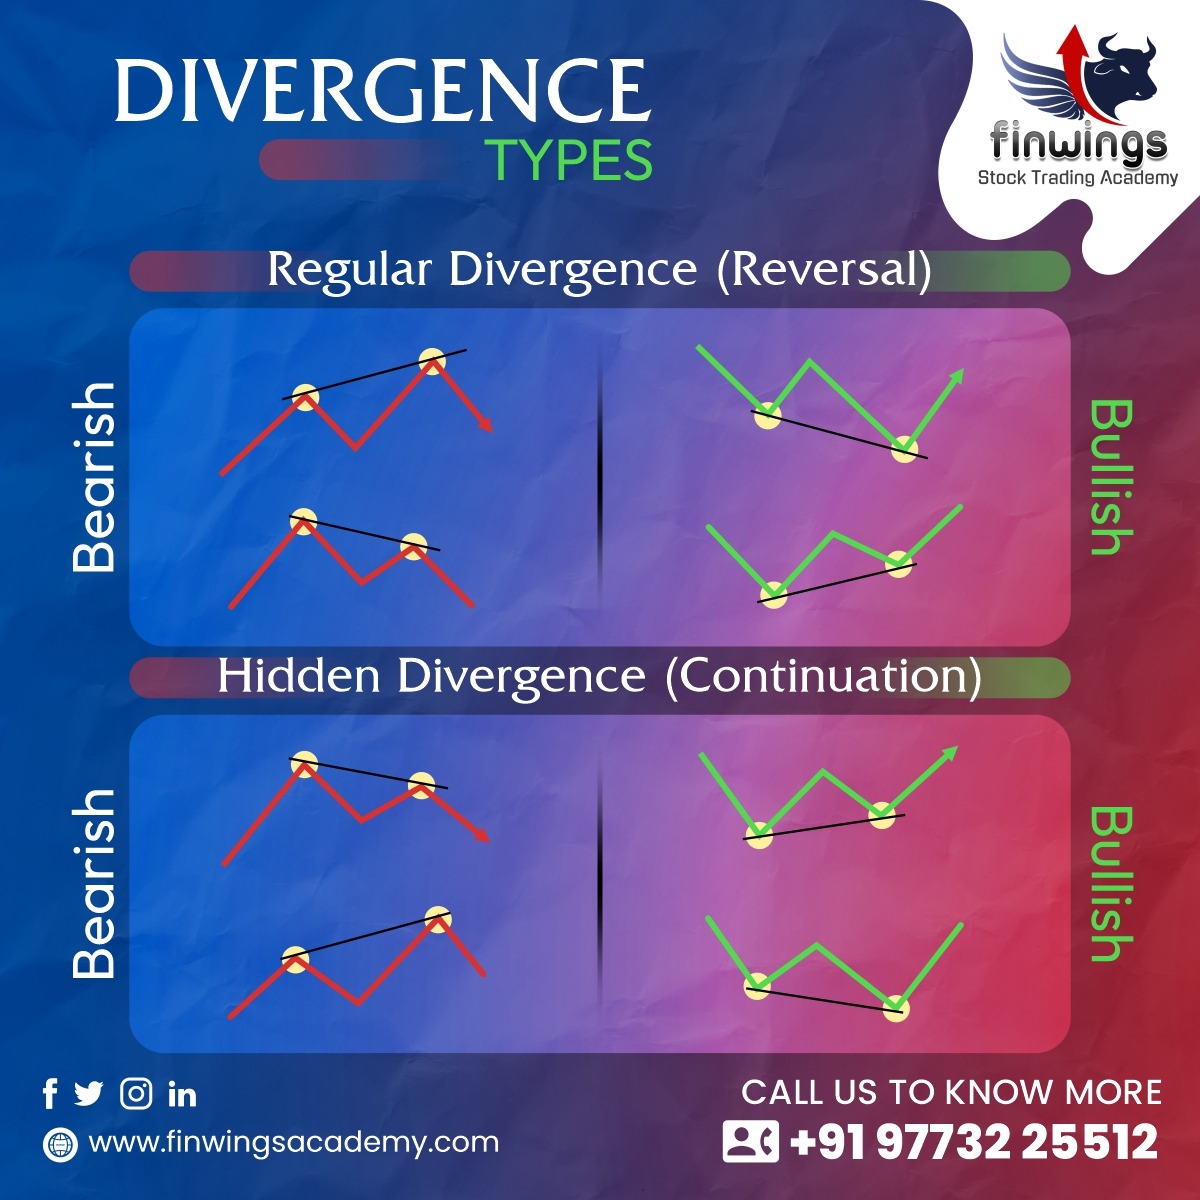 Divergence Types